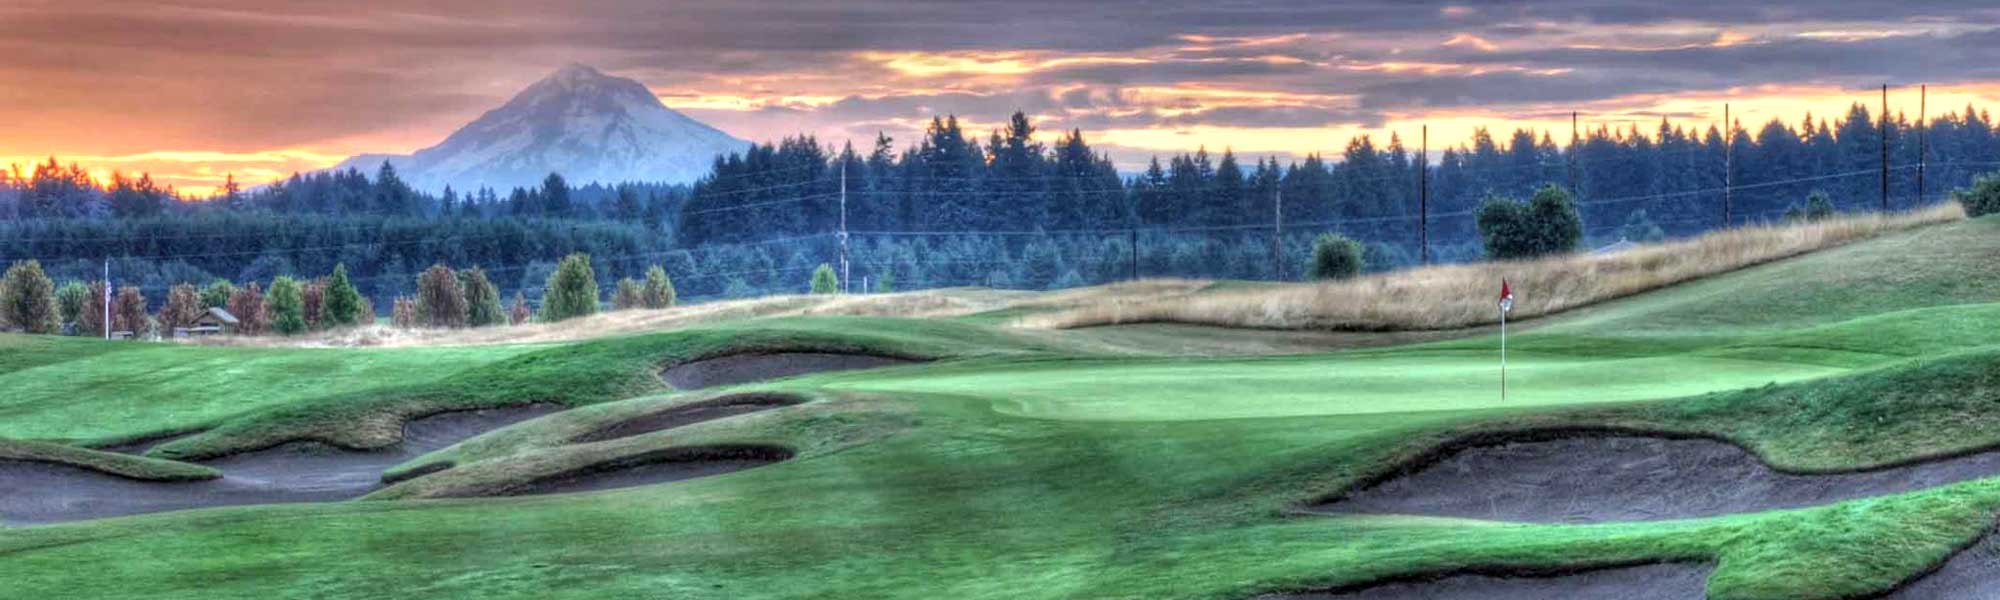 Greens at Stone Creek Golf Course with Mt Hood in background